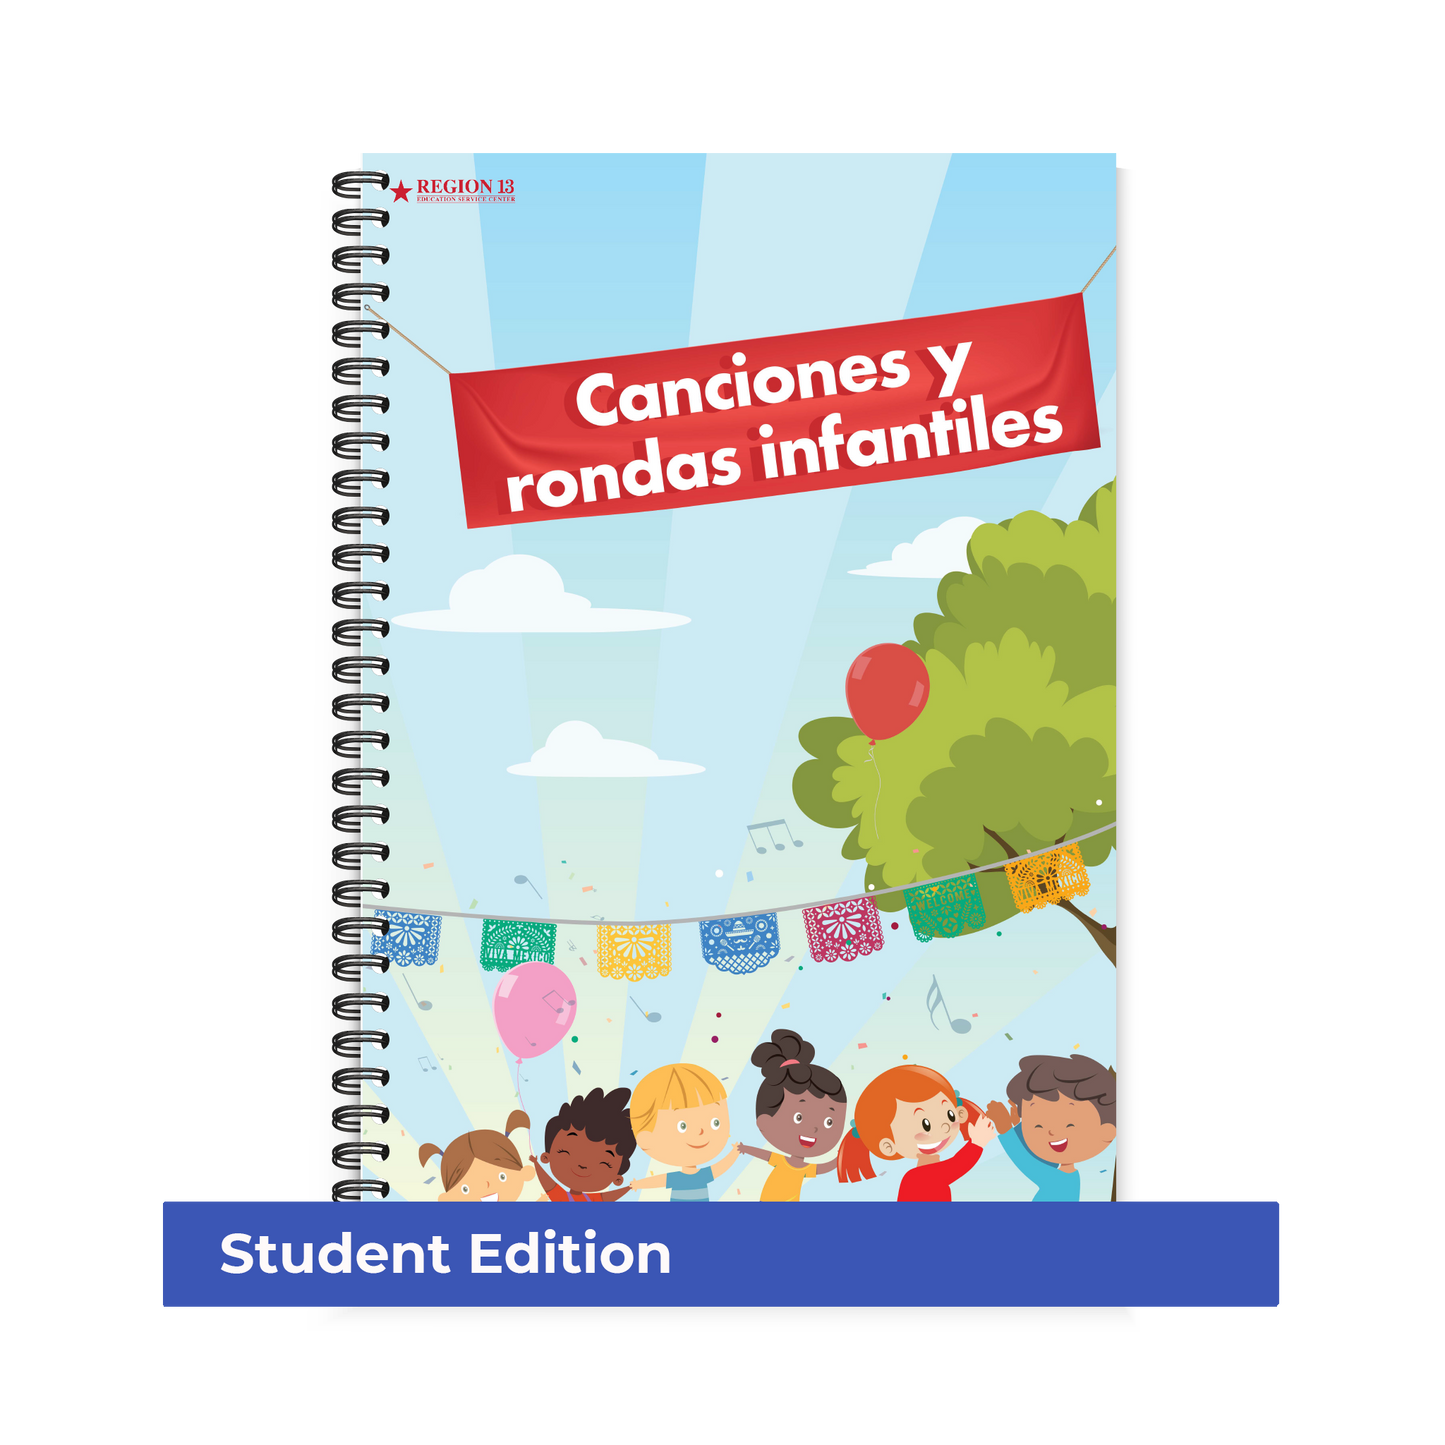 Preview of the blue illustrated cover featuring clouds, a tree, music notes, confetti, papel picado, balloons, and six children holding hands and smiling on the front of Region 13's Canciones y rondas infantiles - Student Version books.